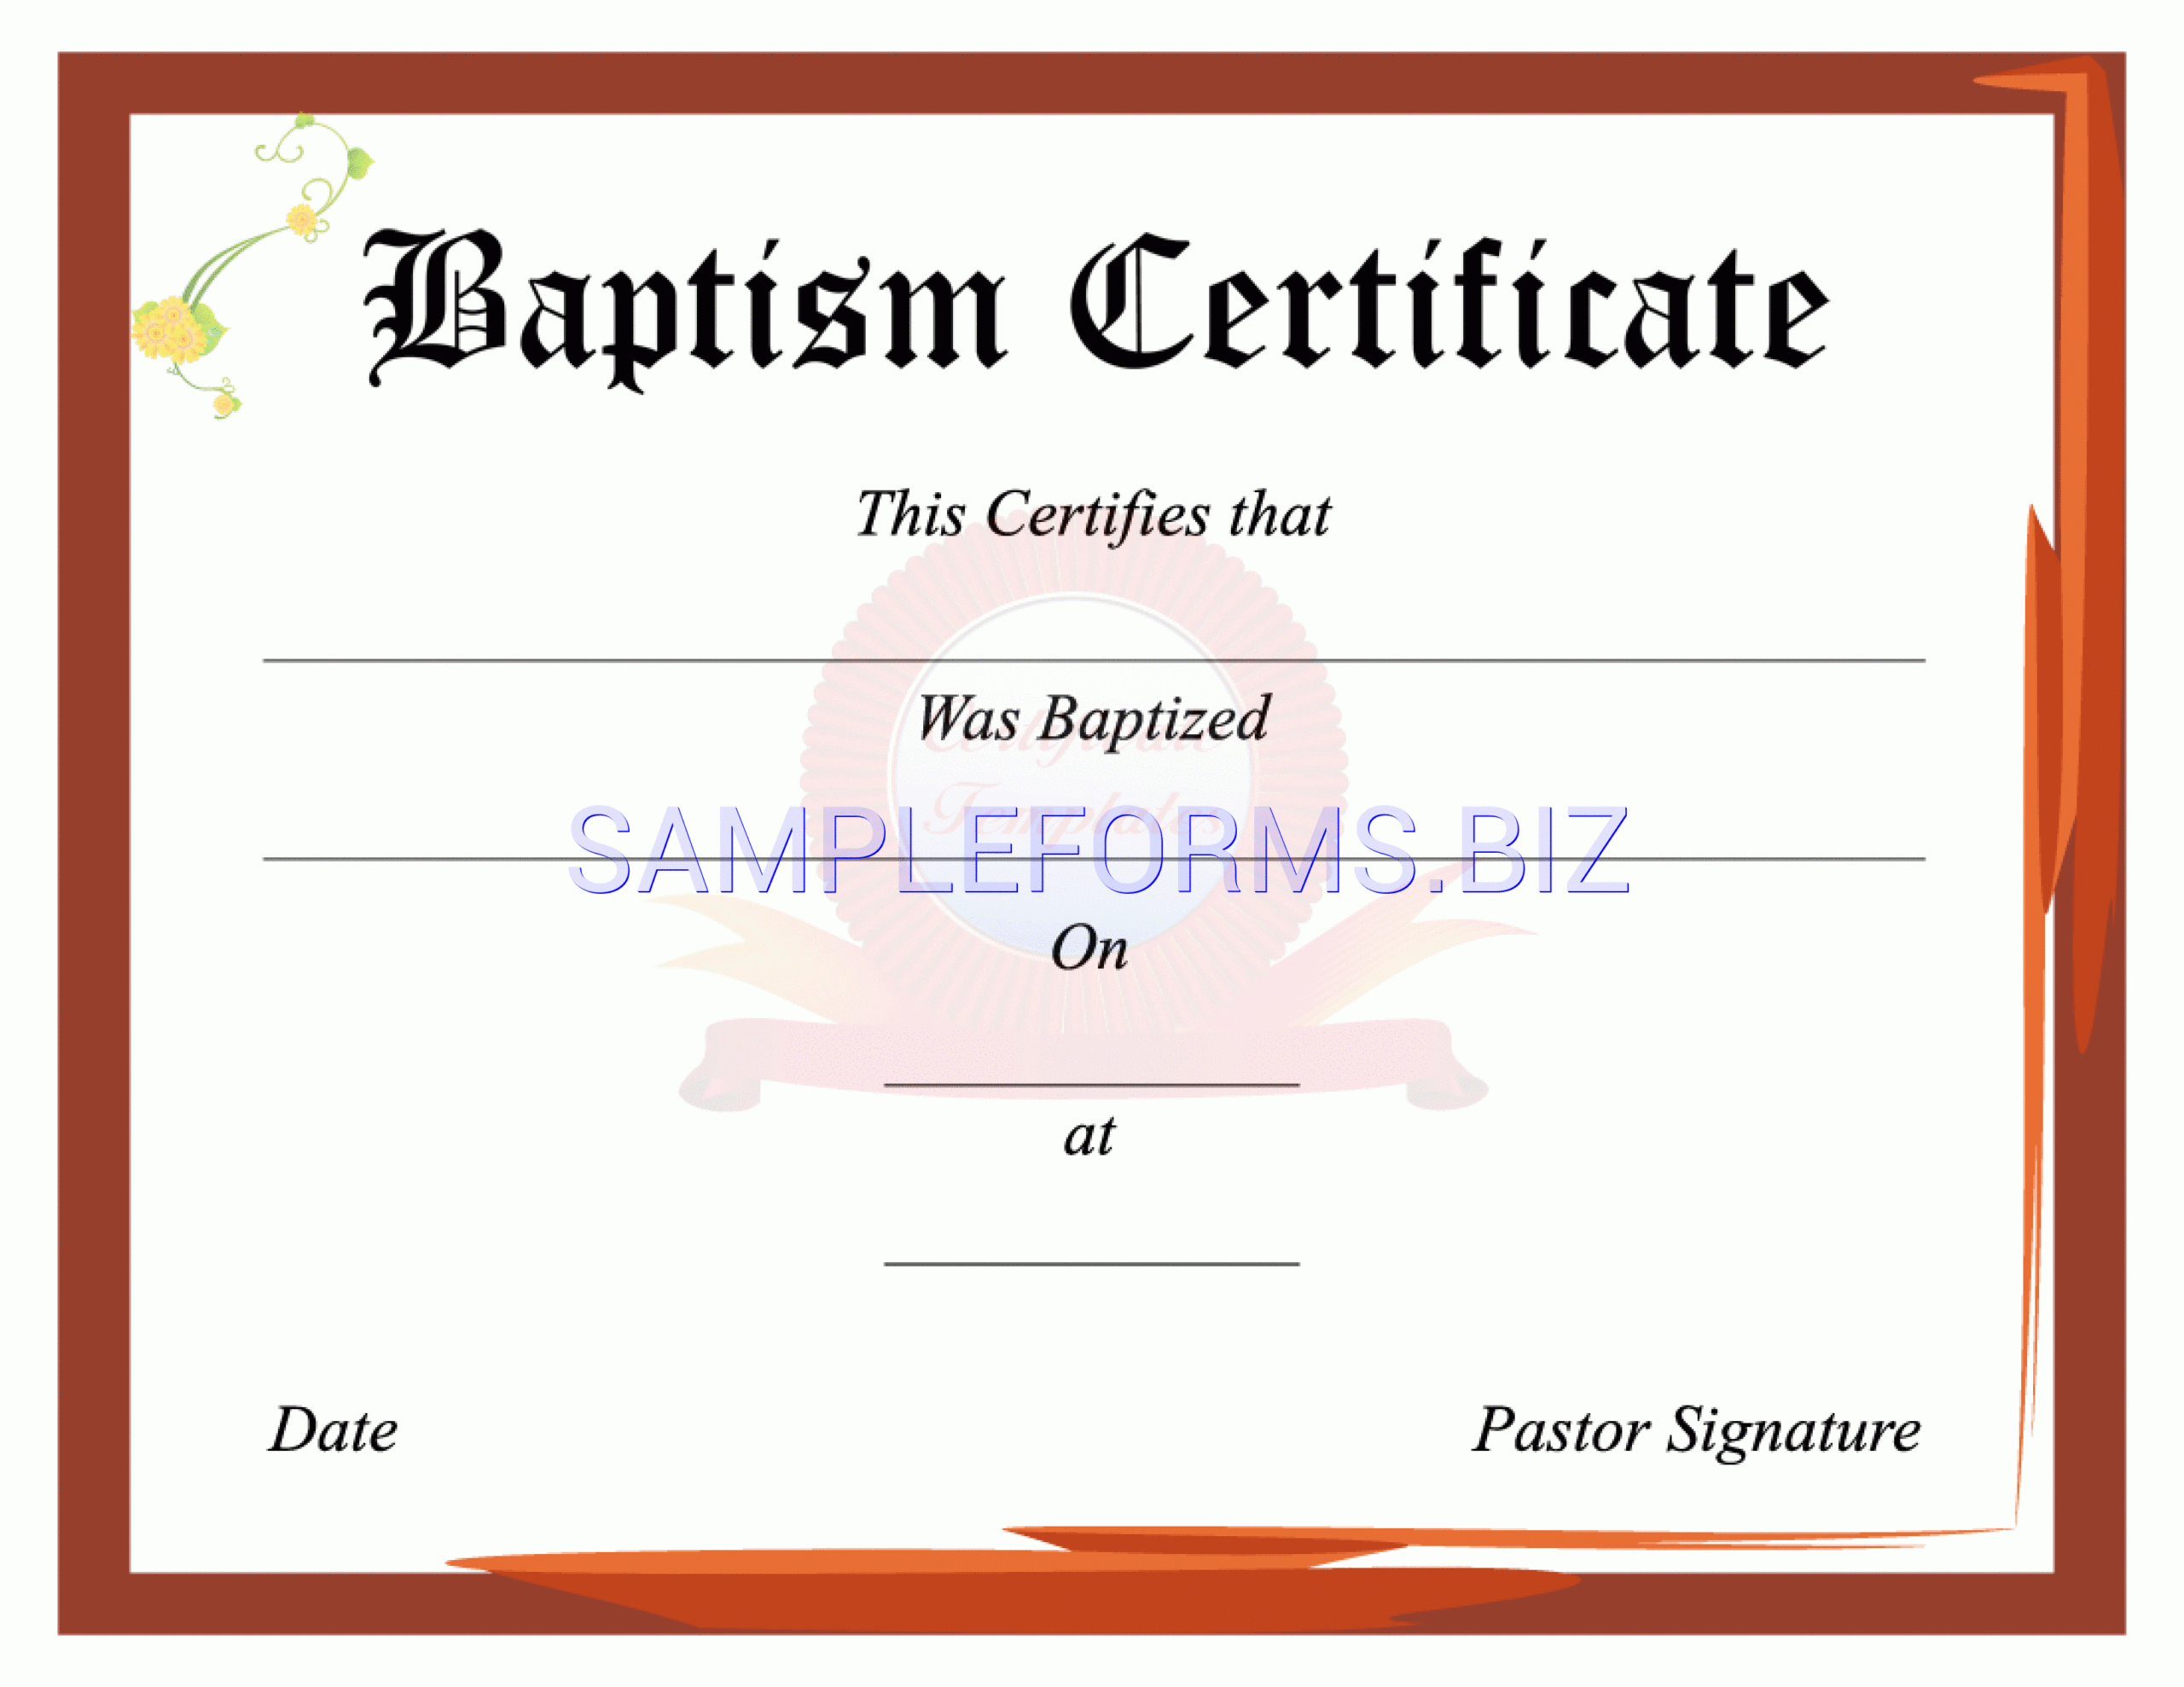 Preview Pdf Baptism Certificate 2, 1 With Baptism Certificate Template Download